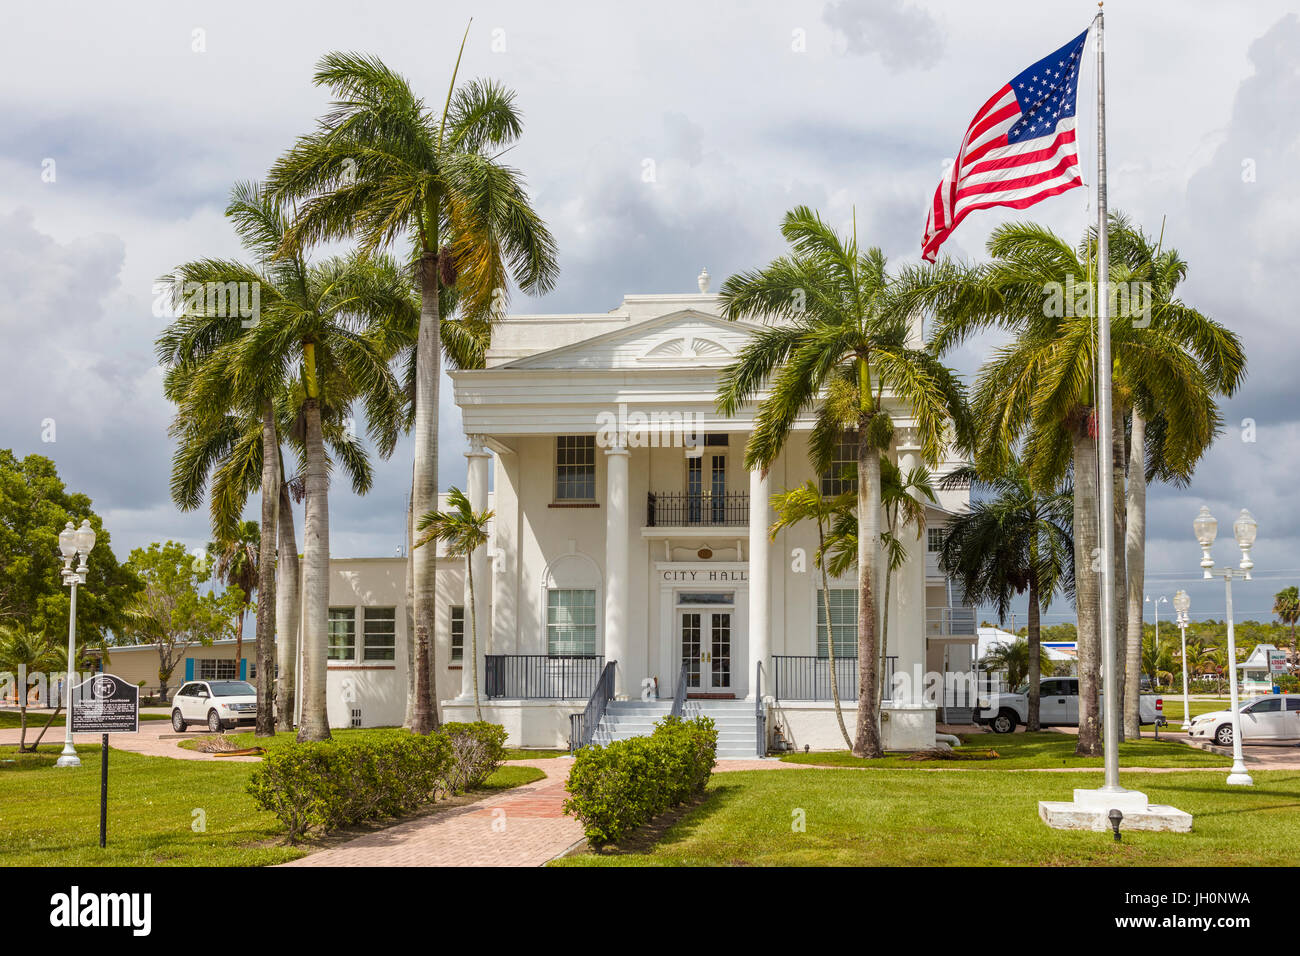 Alten Collier County Courthouse erbaut in Everglades City in Florida 1928. Stockfoto